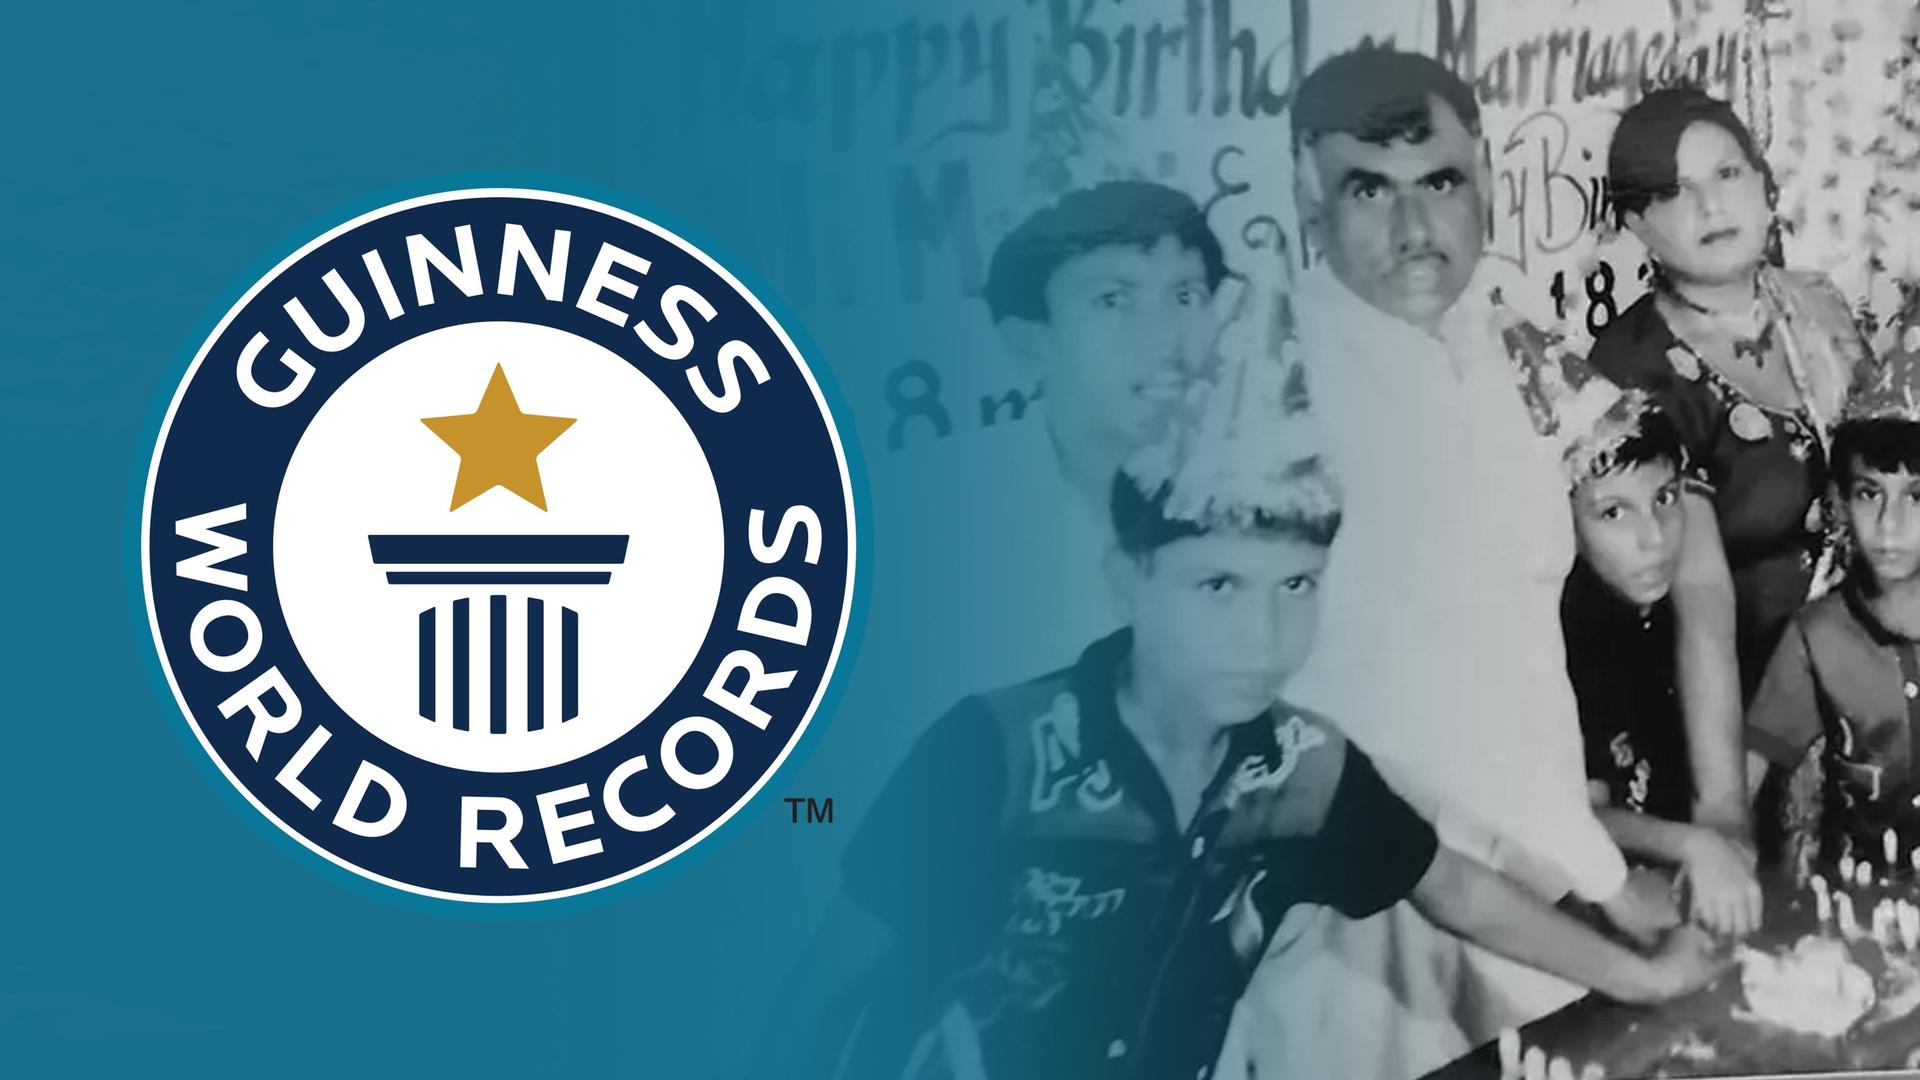 Family of 9 shares same birthday, holds Guinness World Record